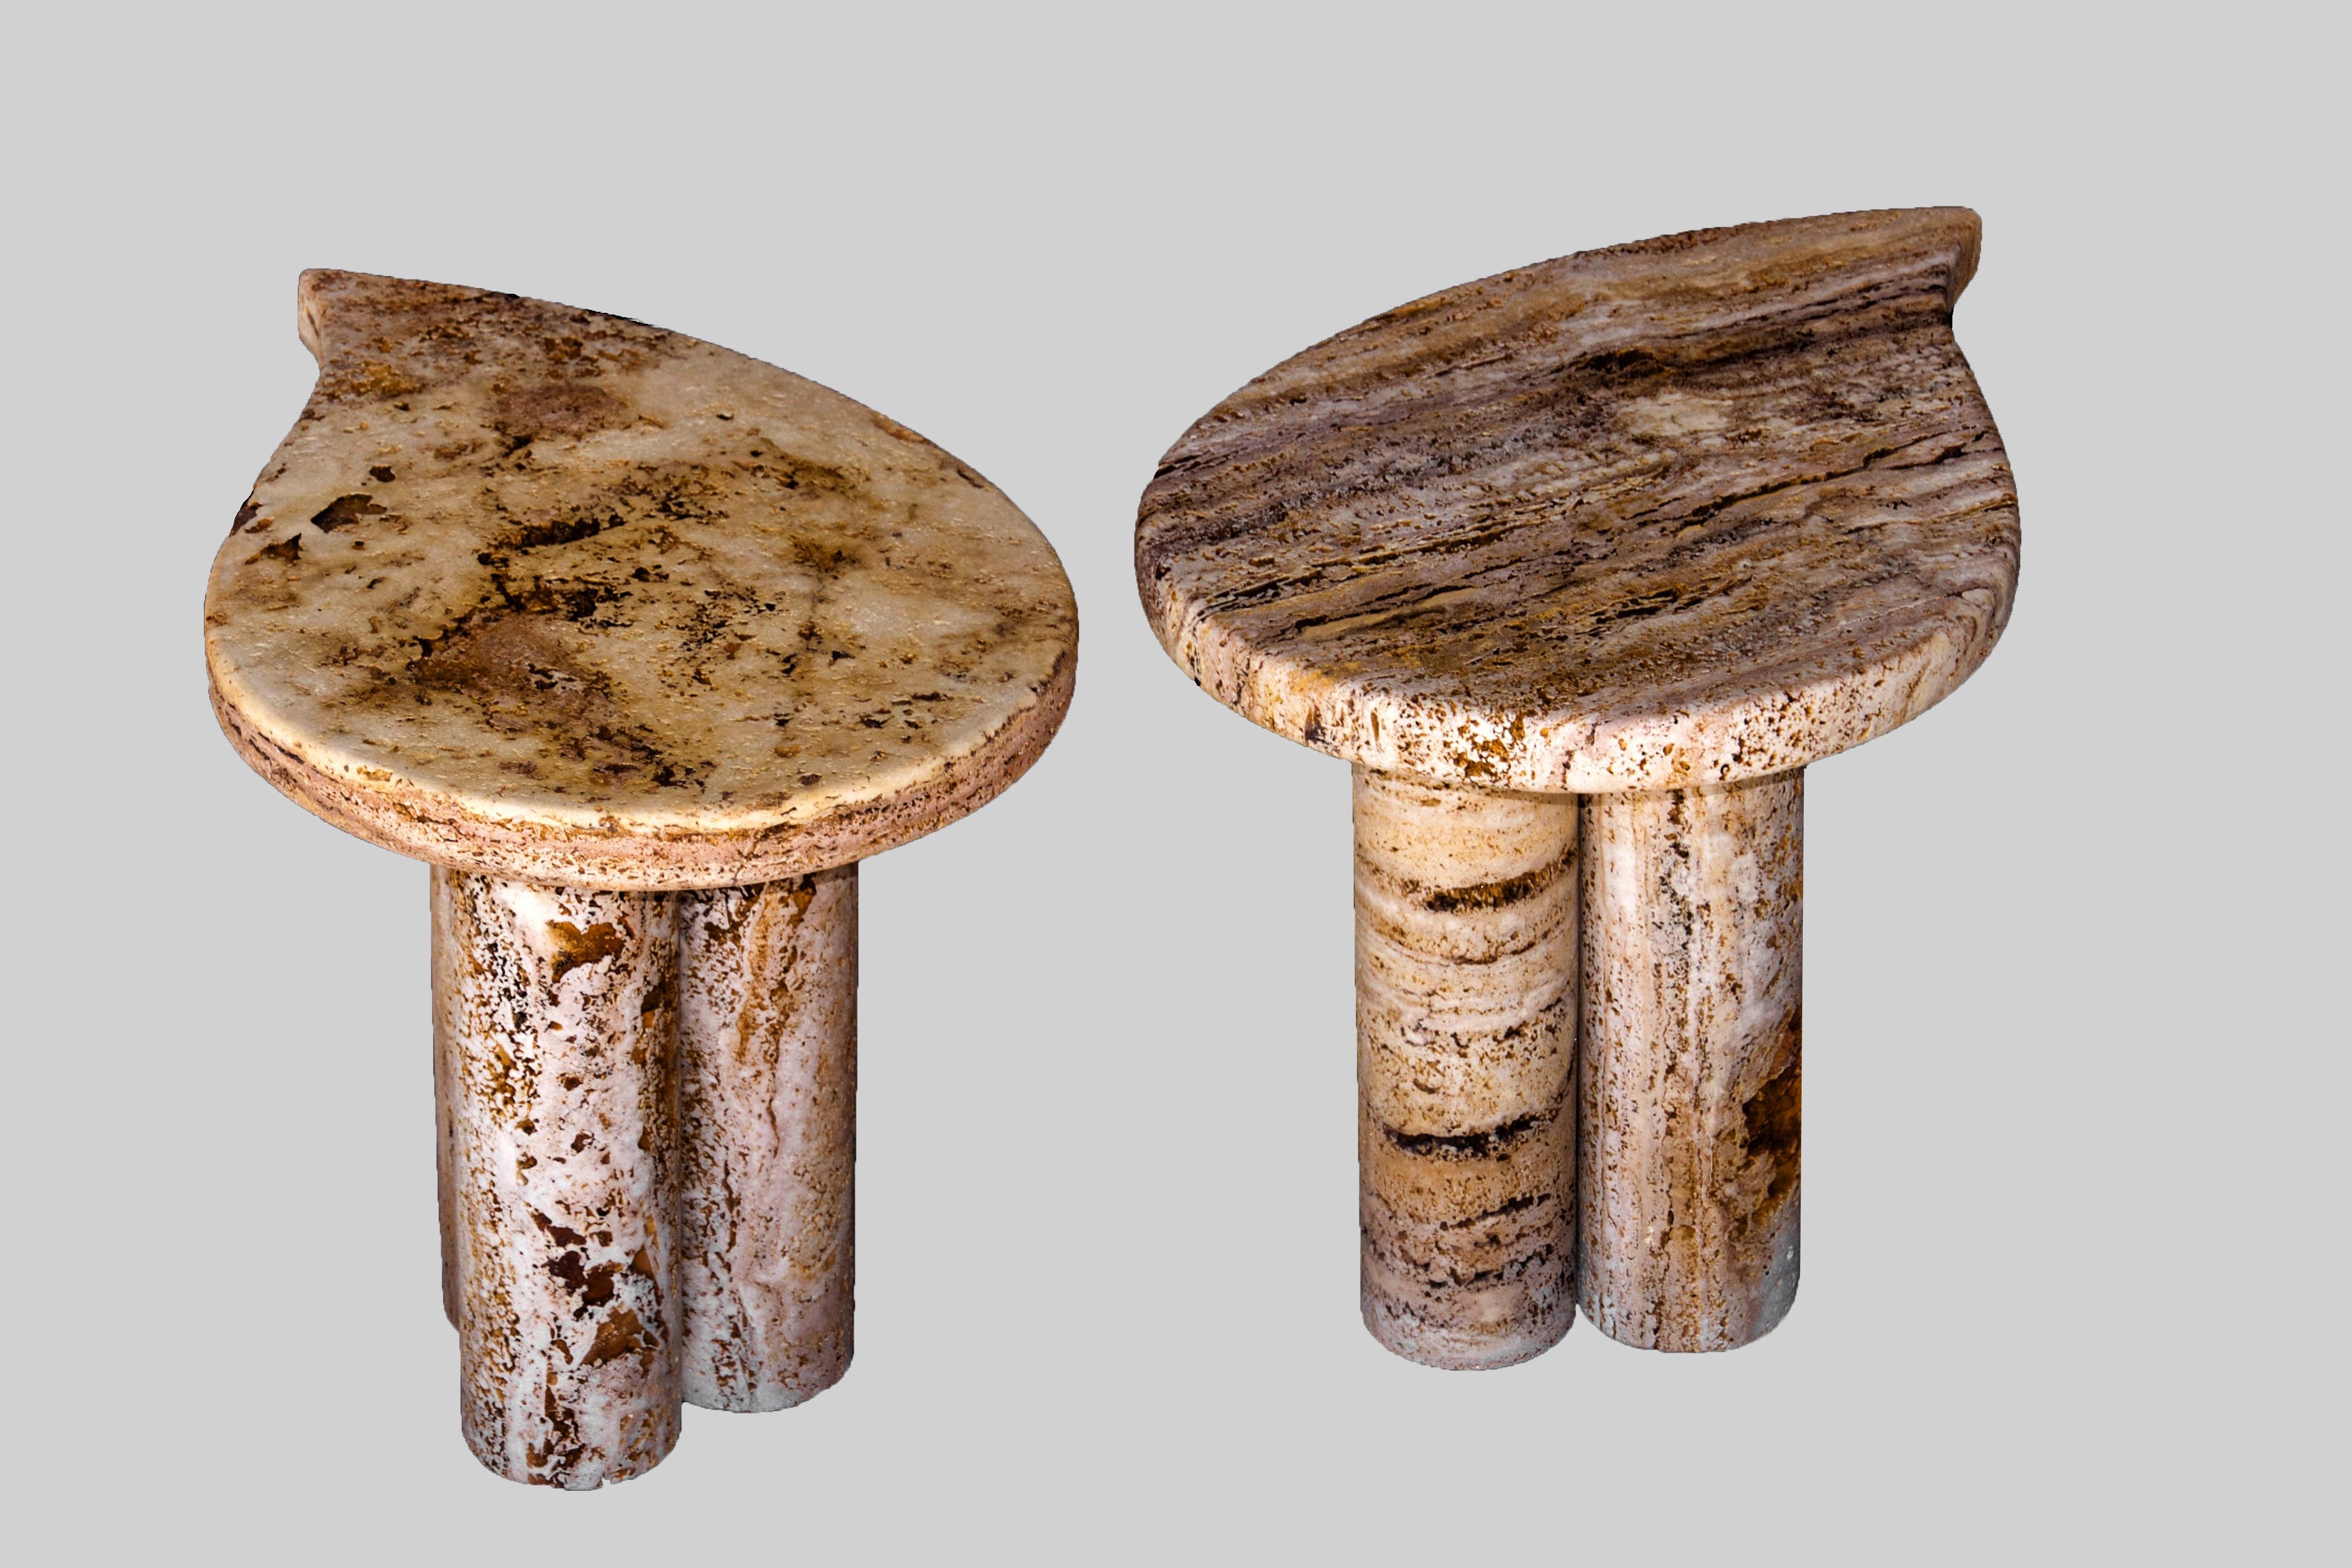 Set of 2 Drop side tables by Jean-Fréderic Bourdier
Dimensions: D 52 x W 35 x H 38.5 cm
Materials: Travertine.

Mostly guided by his sculptor skills JFB and his life time strong attraction for nature, has started out this collection in 2021 as